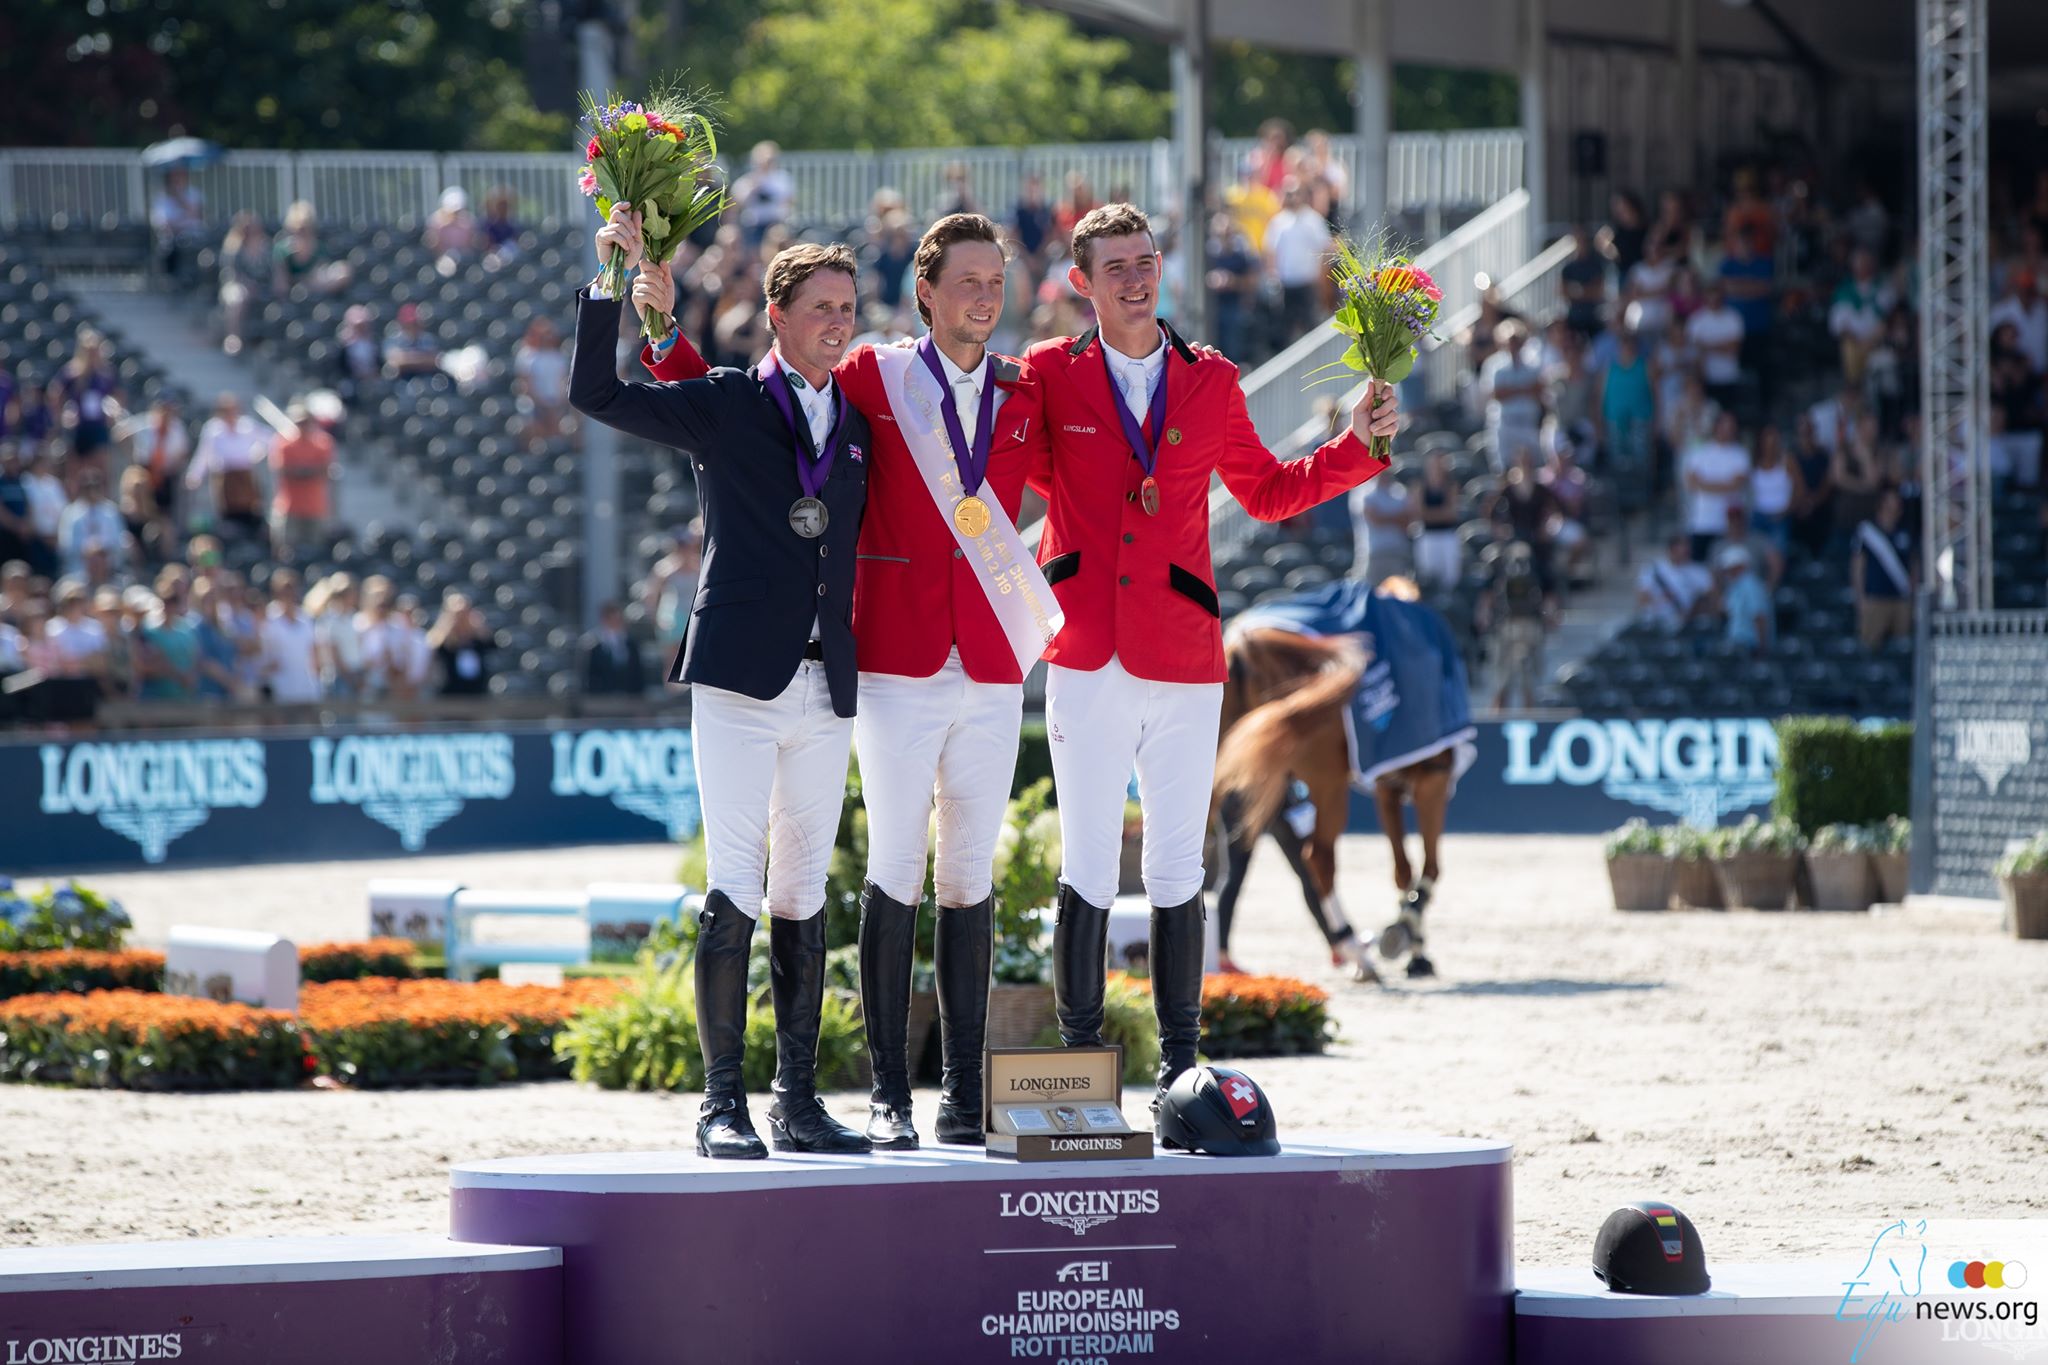 All horses and riders for next European Championships revealed